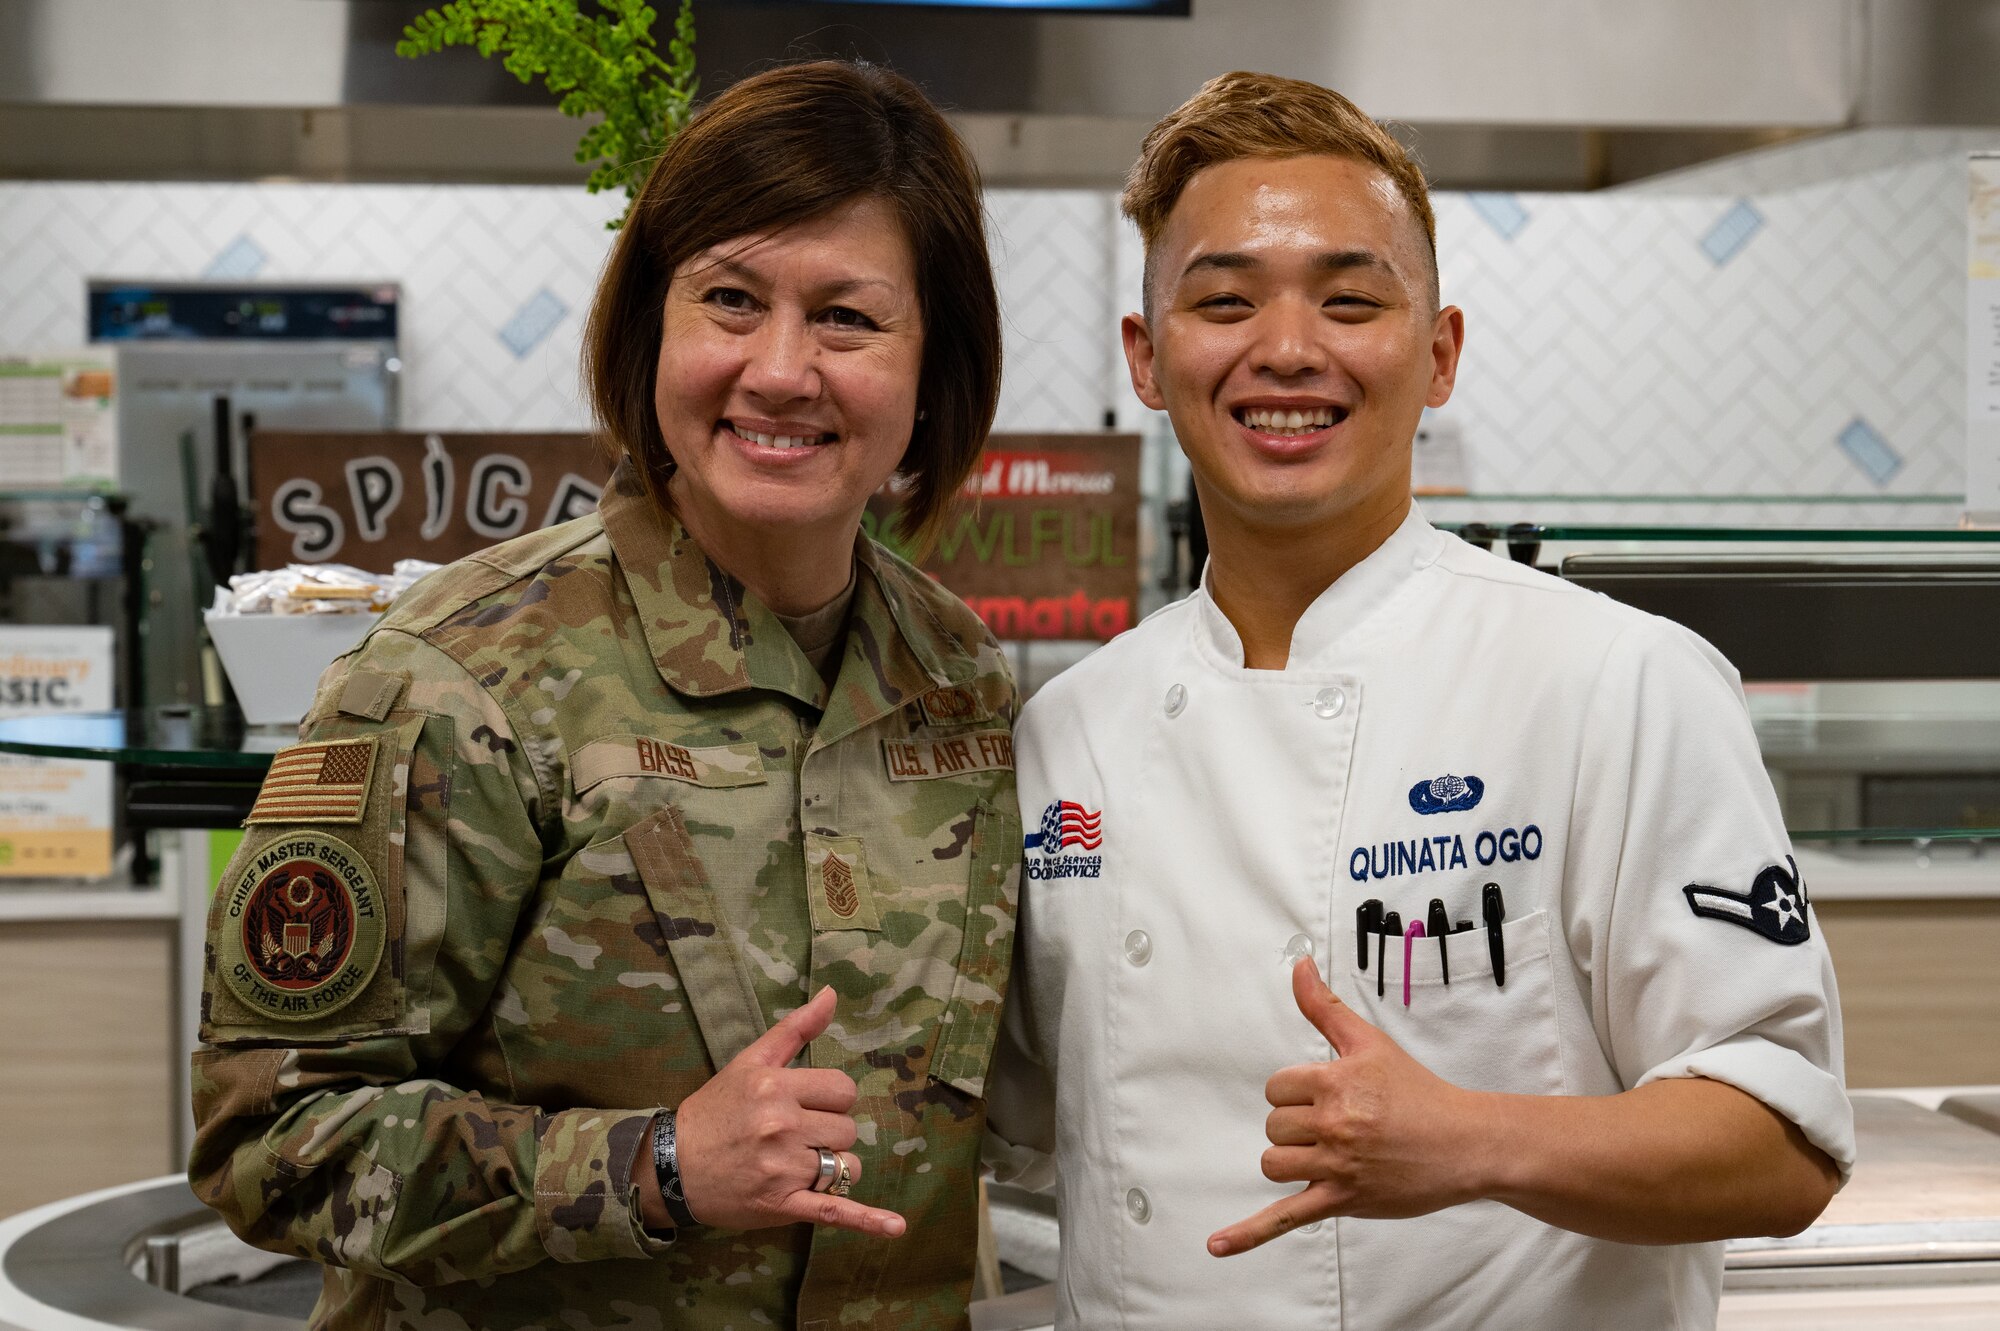 Chief Master Sgt. of the Air Force JoAnne S. Bass, poses for a picture with Airman Gary Quinata Ogo, 99th Force Support Squadron food service specialist, during a visit at Nellis Air Force Base, Nevada, May 2, 2023.